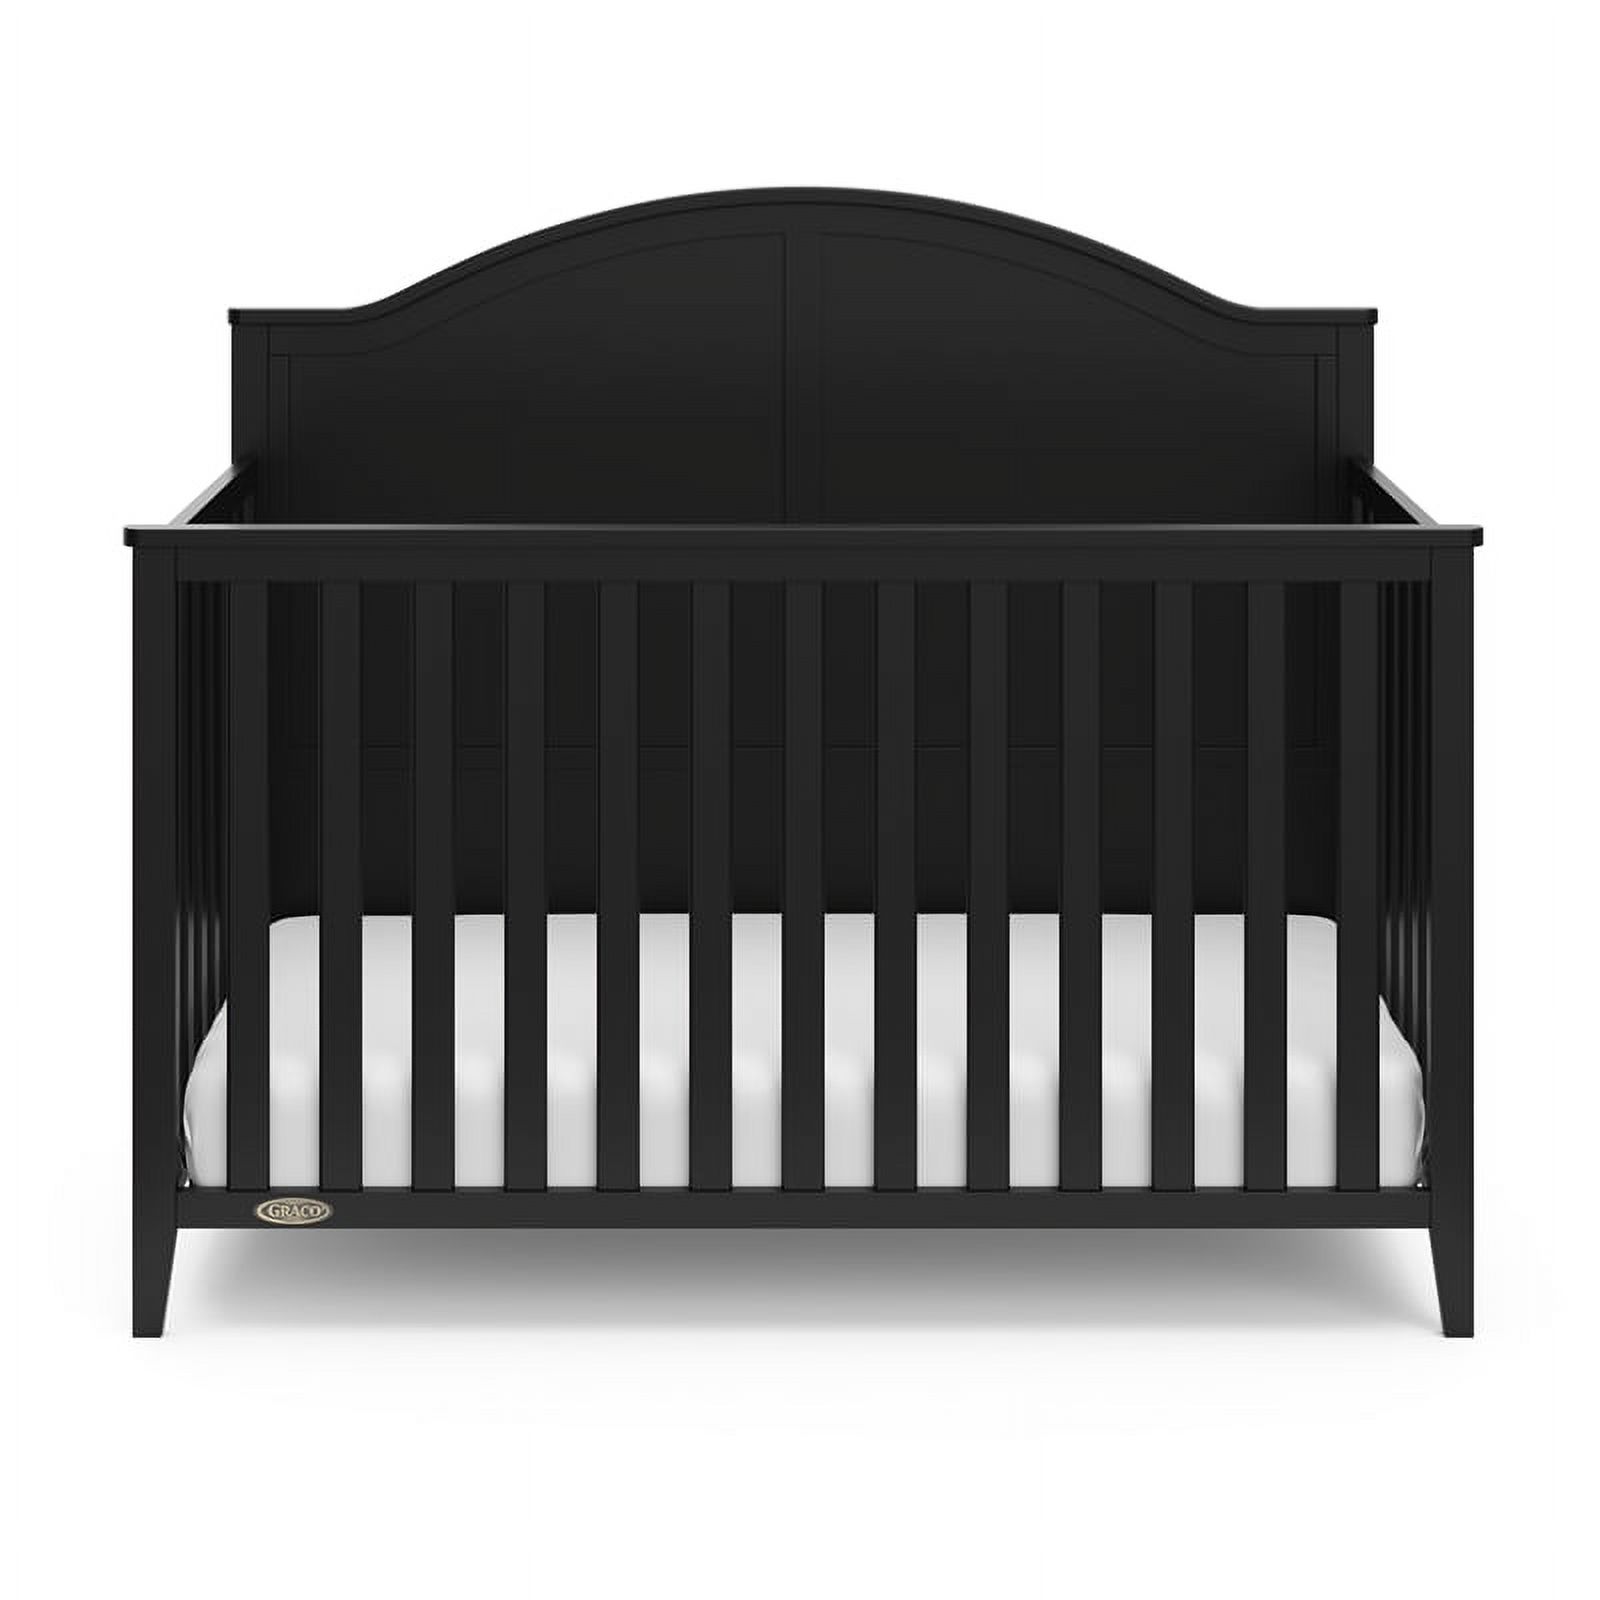 Graco Wilfred 5-in-1 Convertible Baby Crib, Black - image 2 of 4